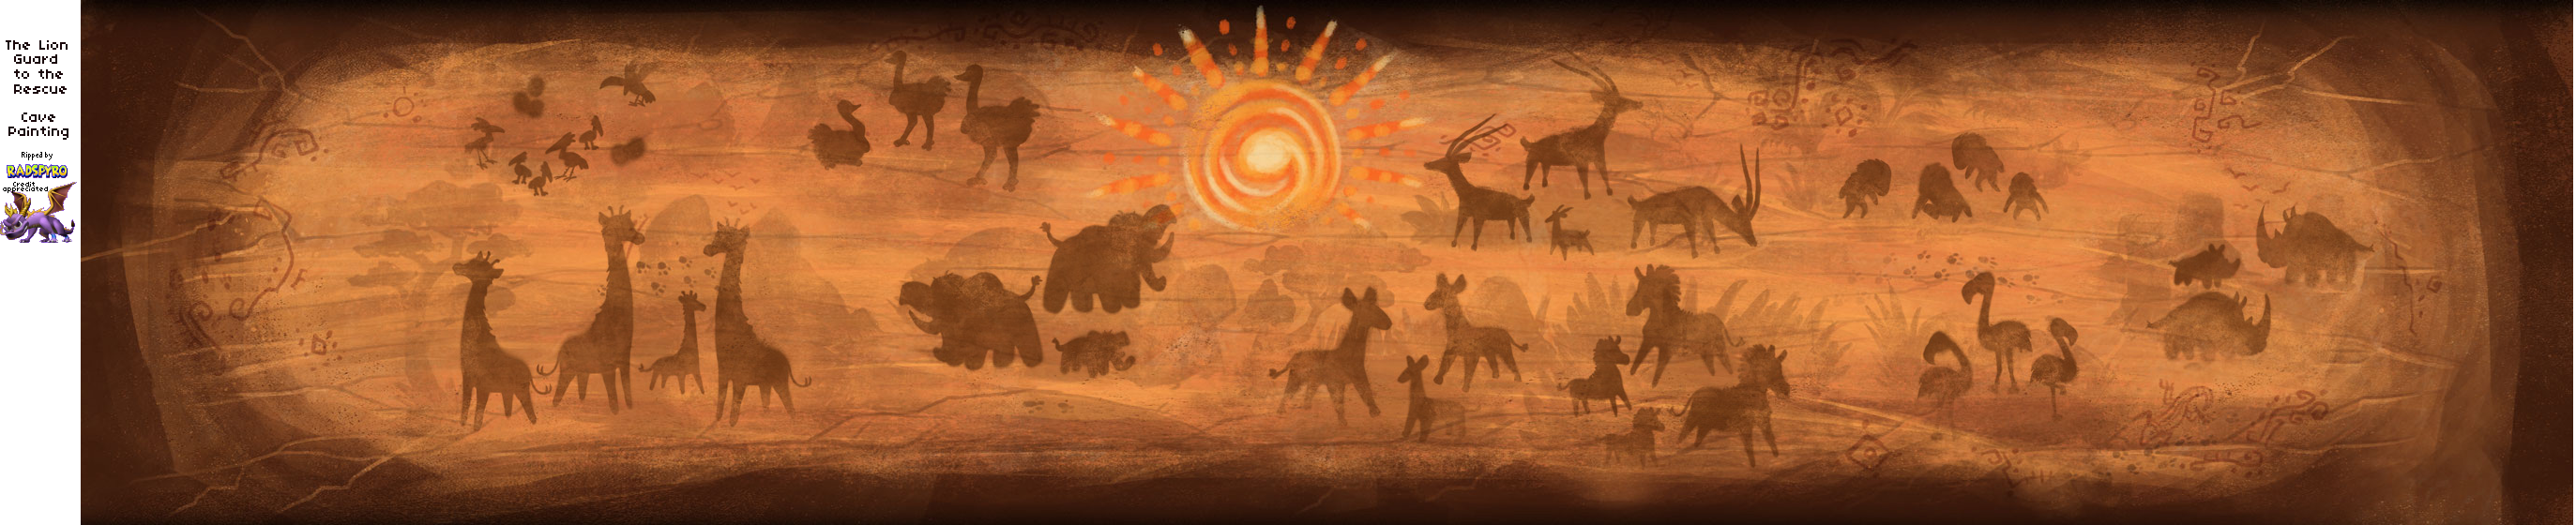 The Lion Guard to the Rescue - Full Cave Painting